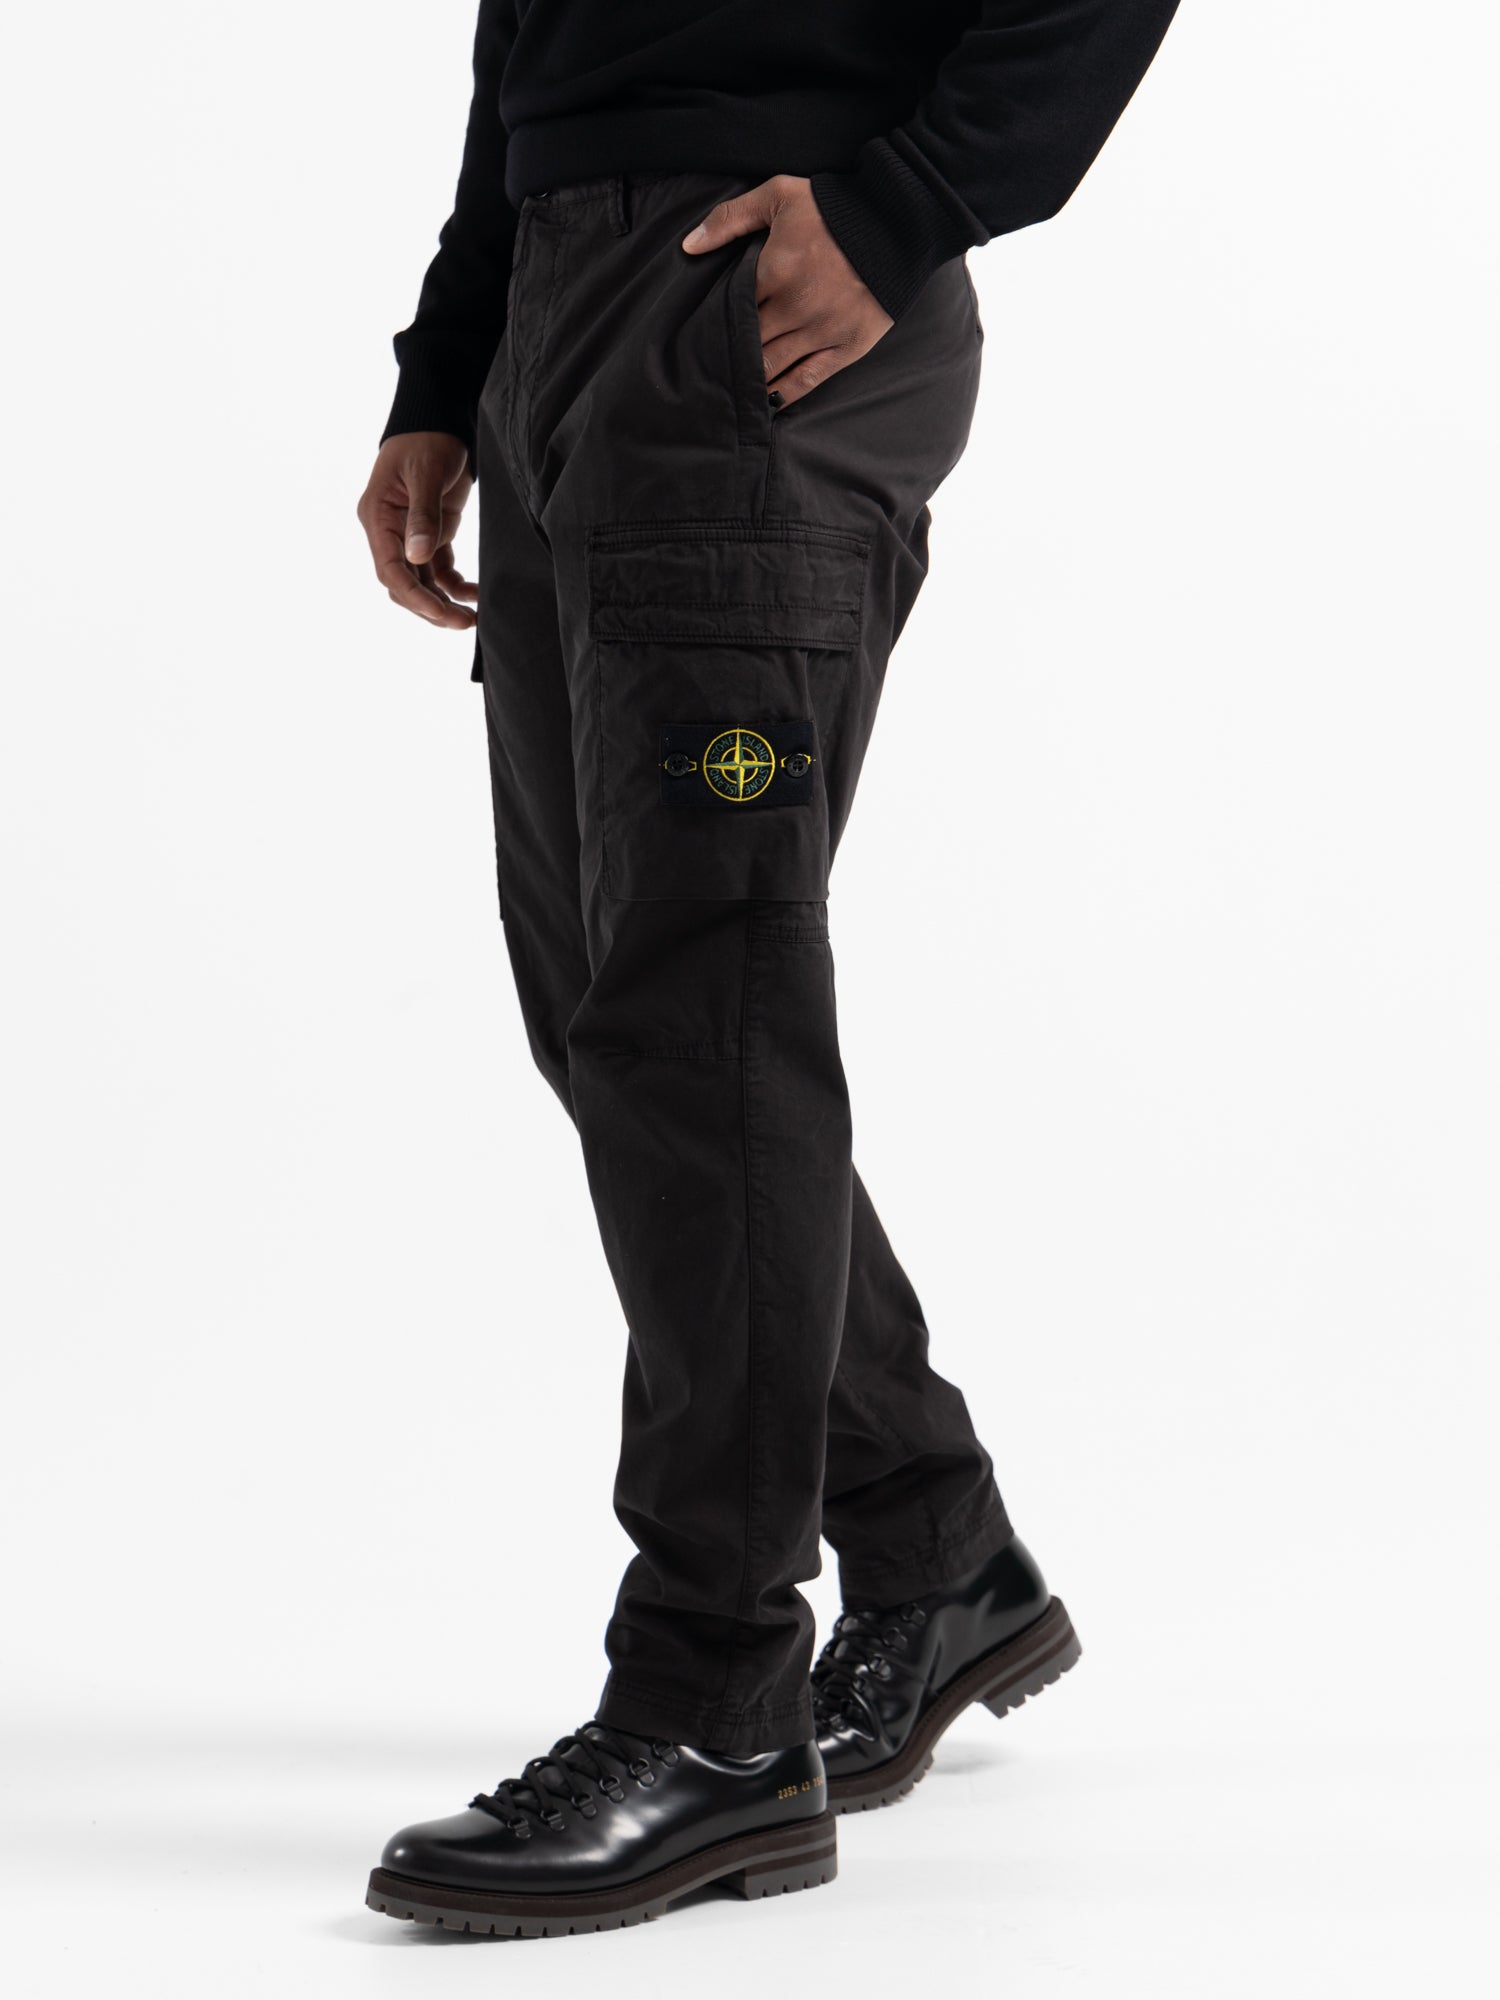 Rothco Pants: A Comprehensive Review of Quality and Durability